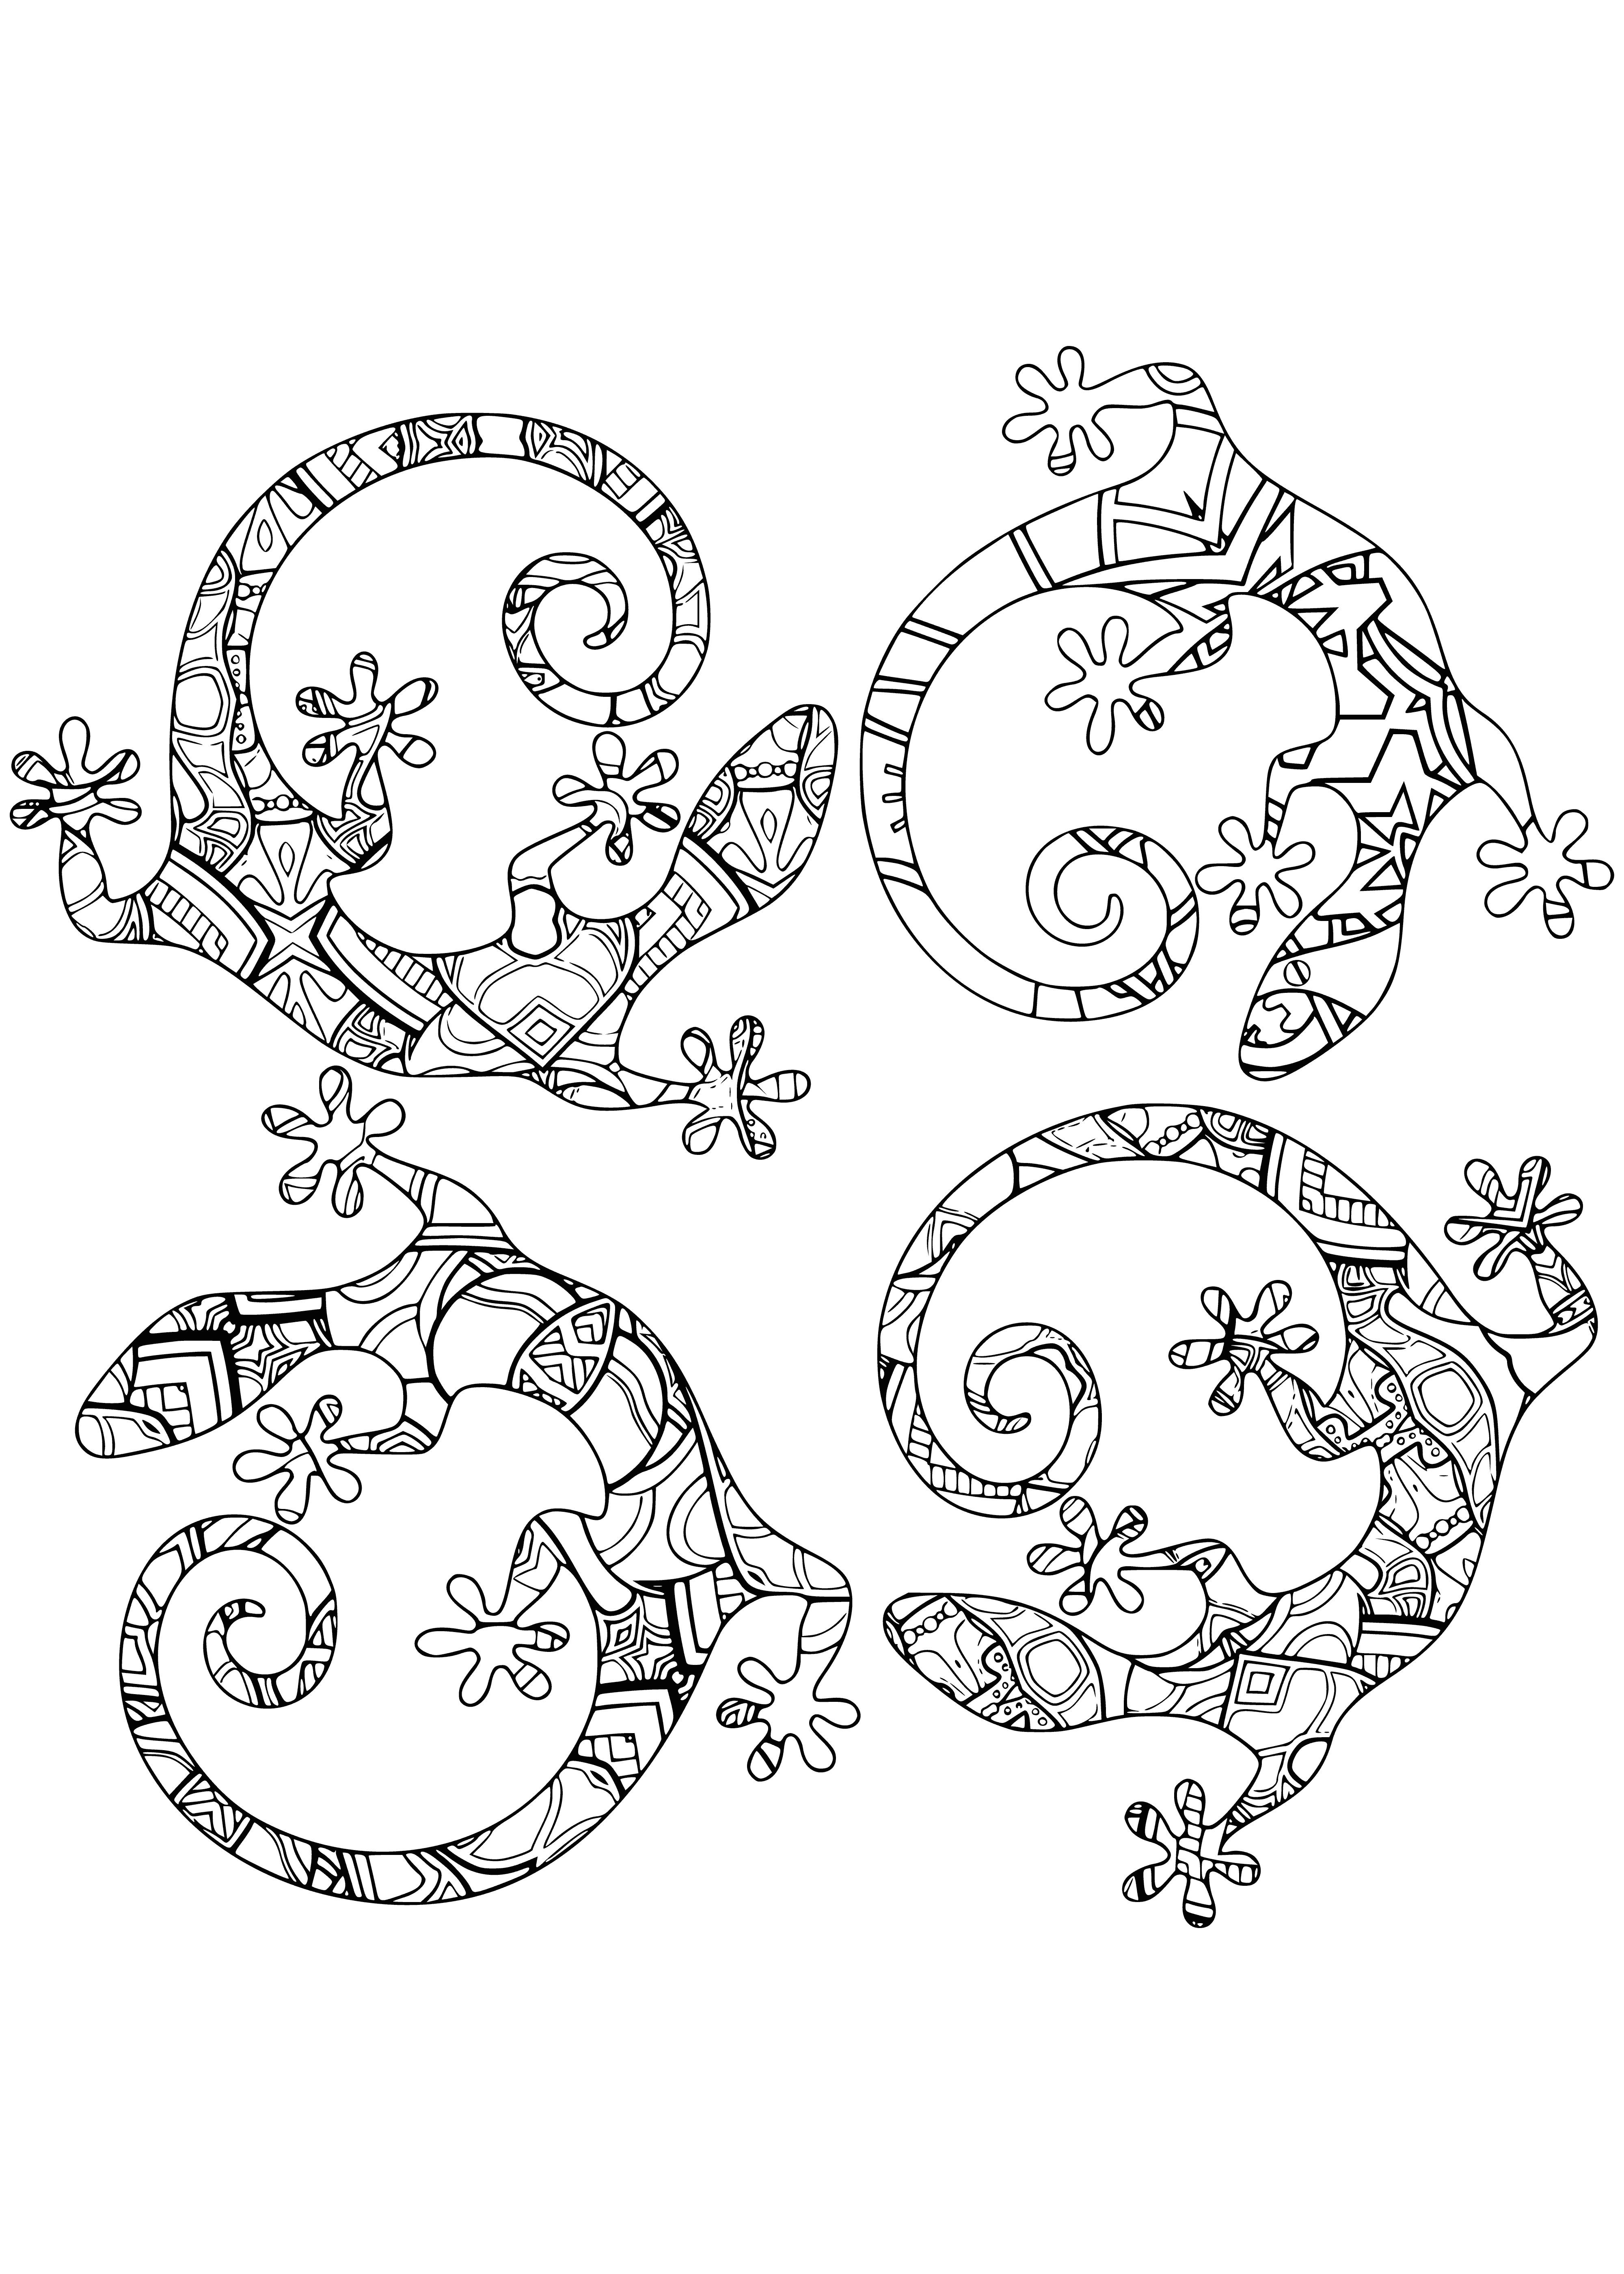 Lizards coloring page